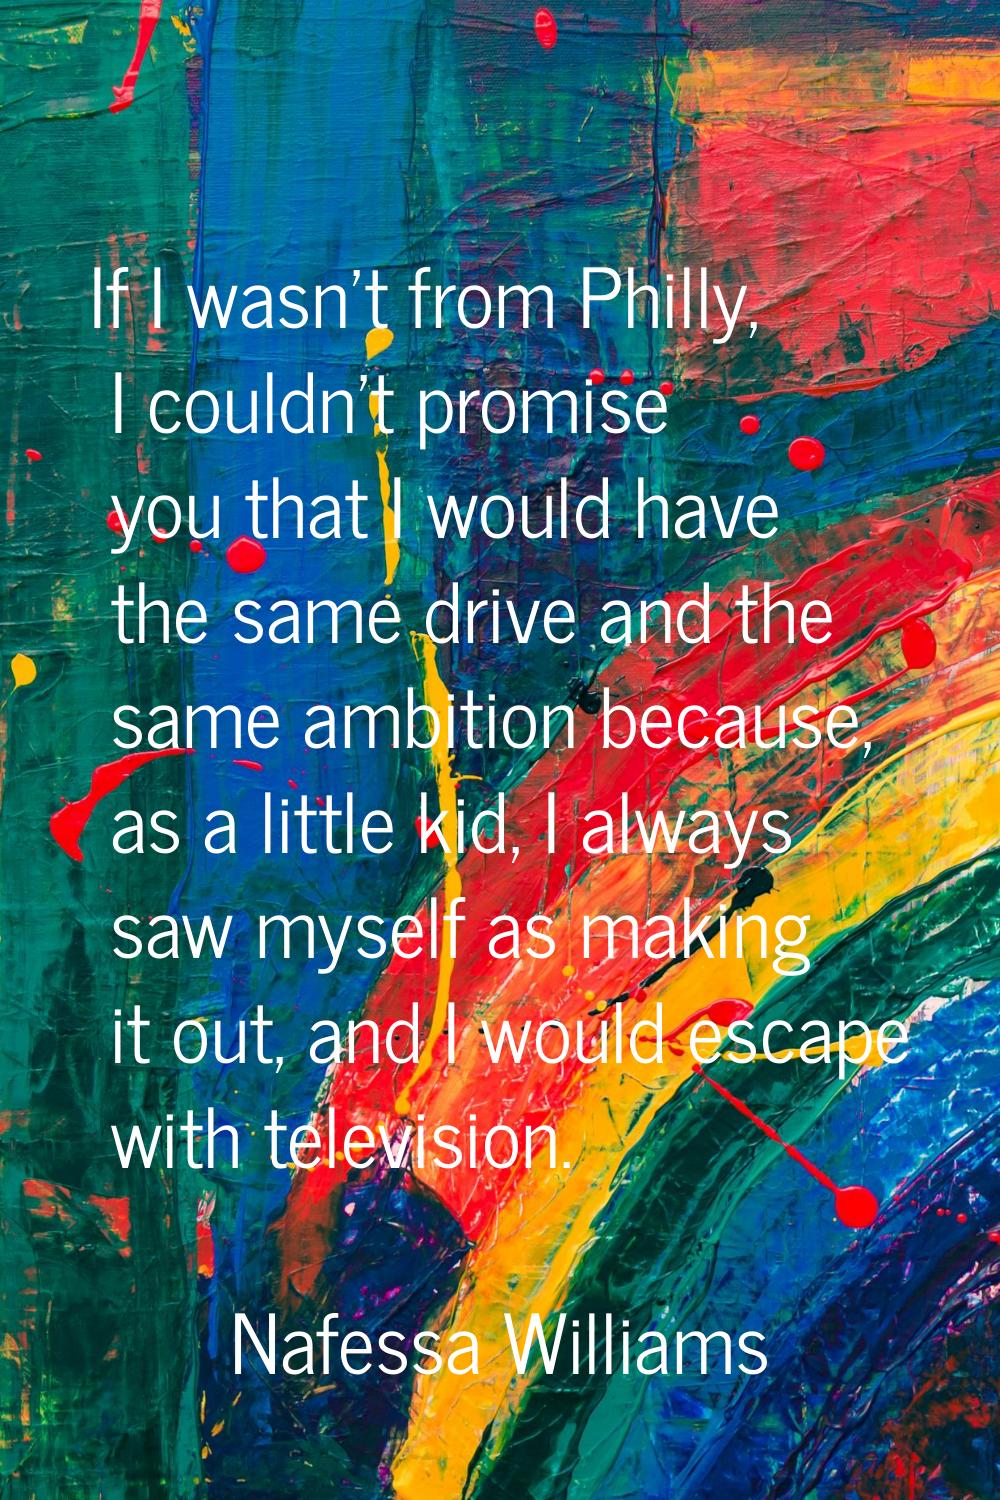 If I wasn't from Philly, I couldn't promise you that I would have the same drive and the same ambit